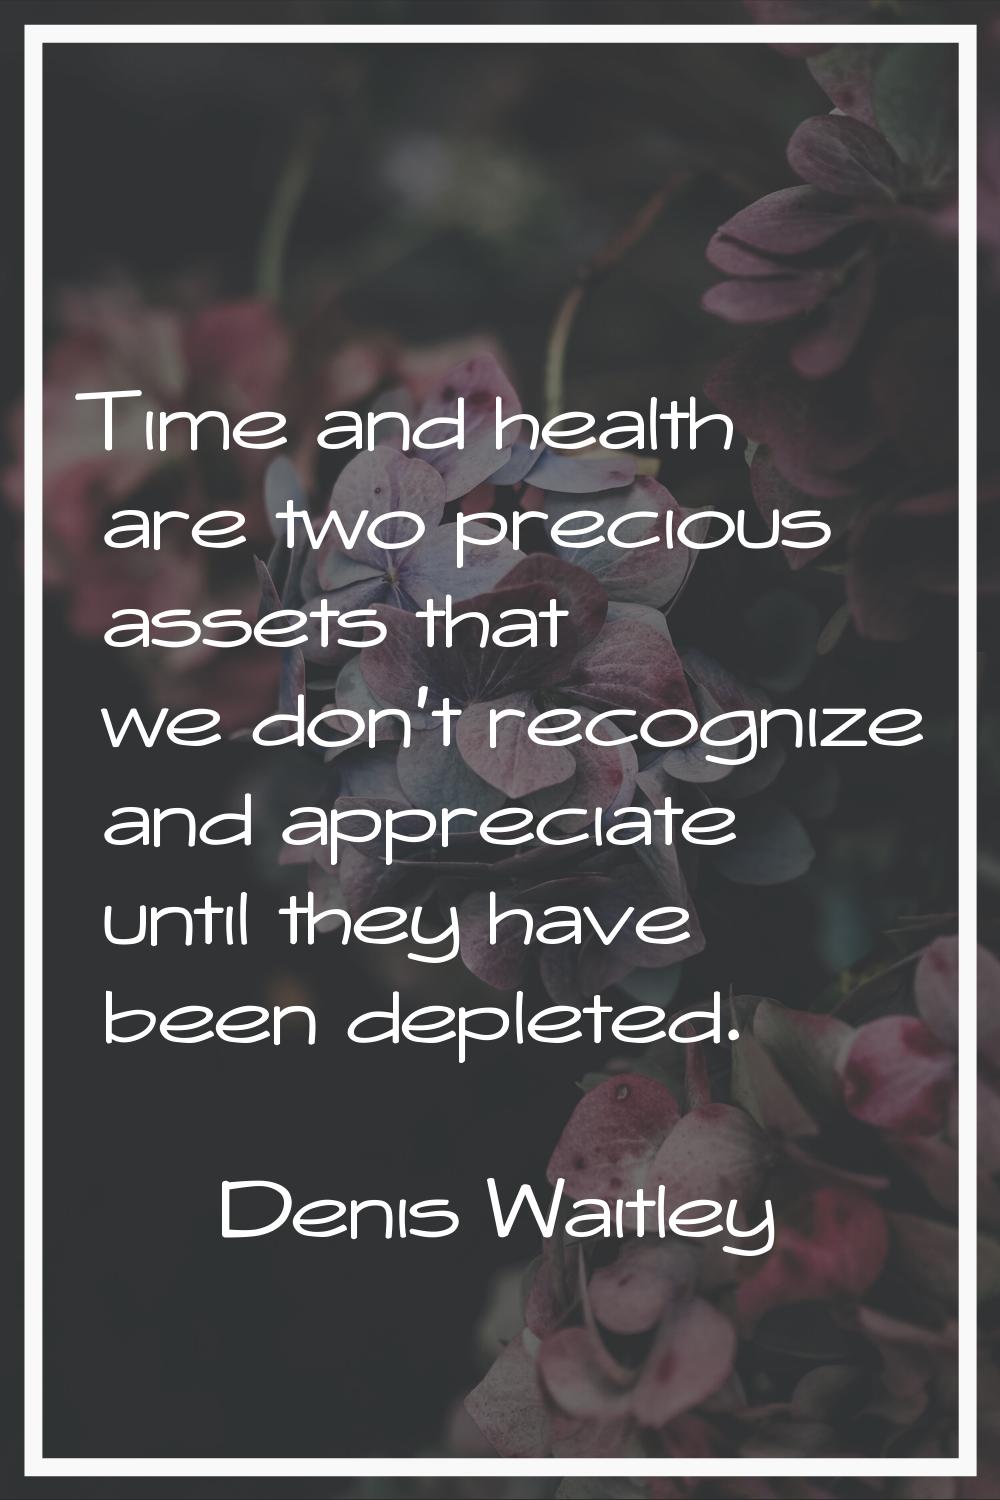 Time and health are two precious assets that we don't recognize and appreciate until they have been